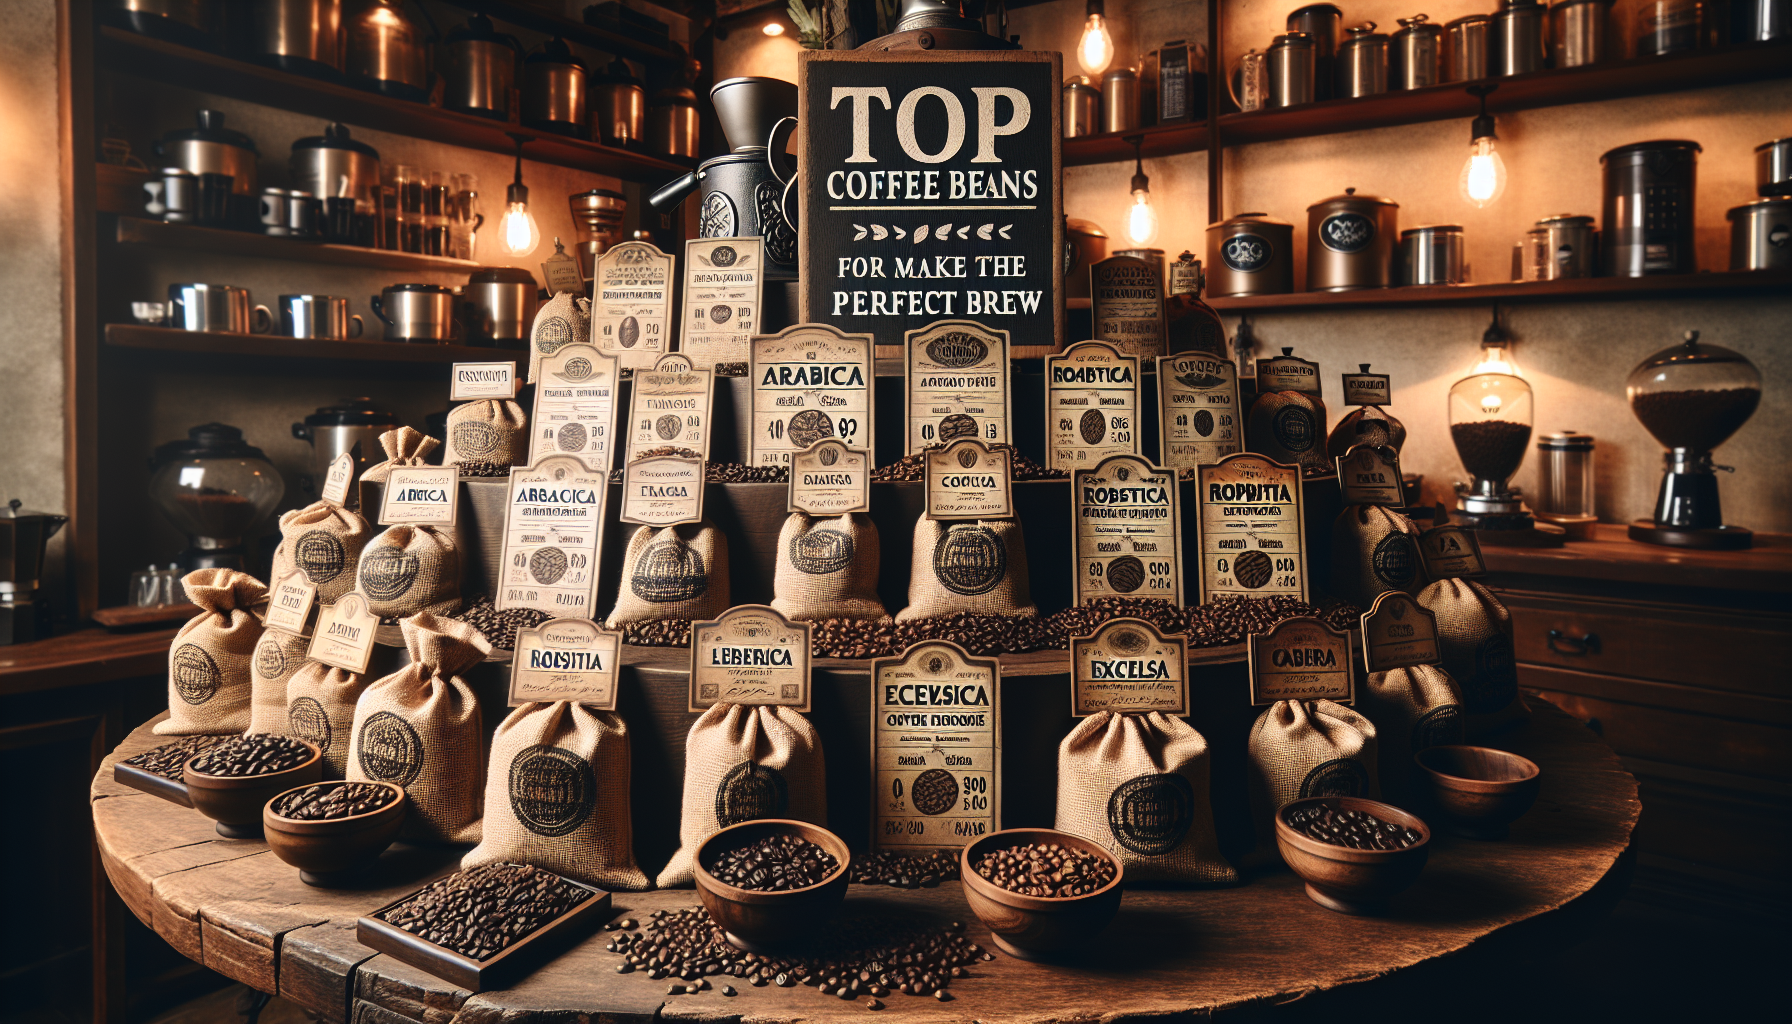 Create an intricate display of top coffee bean brands known for making the perfect brew. Show different types of coffee beans carefully arranged in rustic brown burlap bags with labels showcasing thei